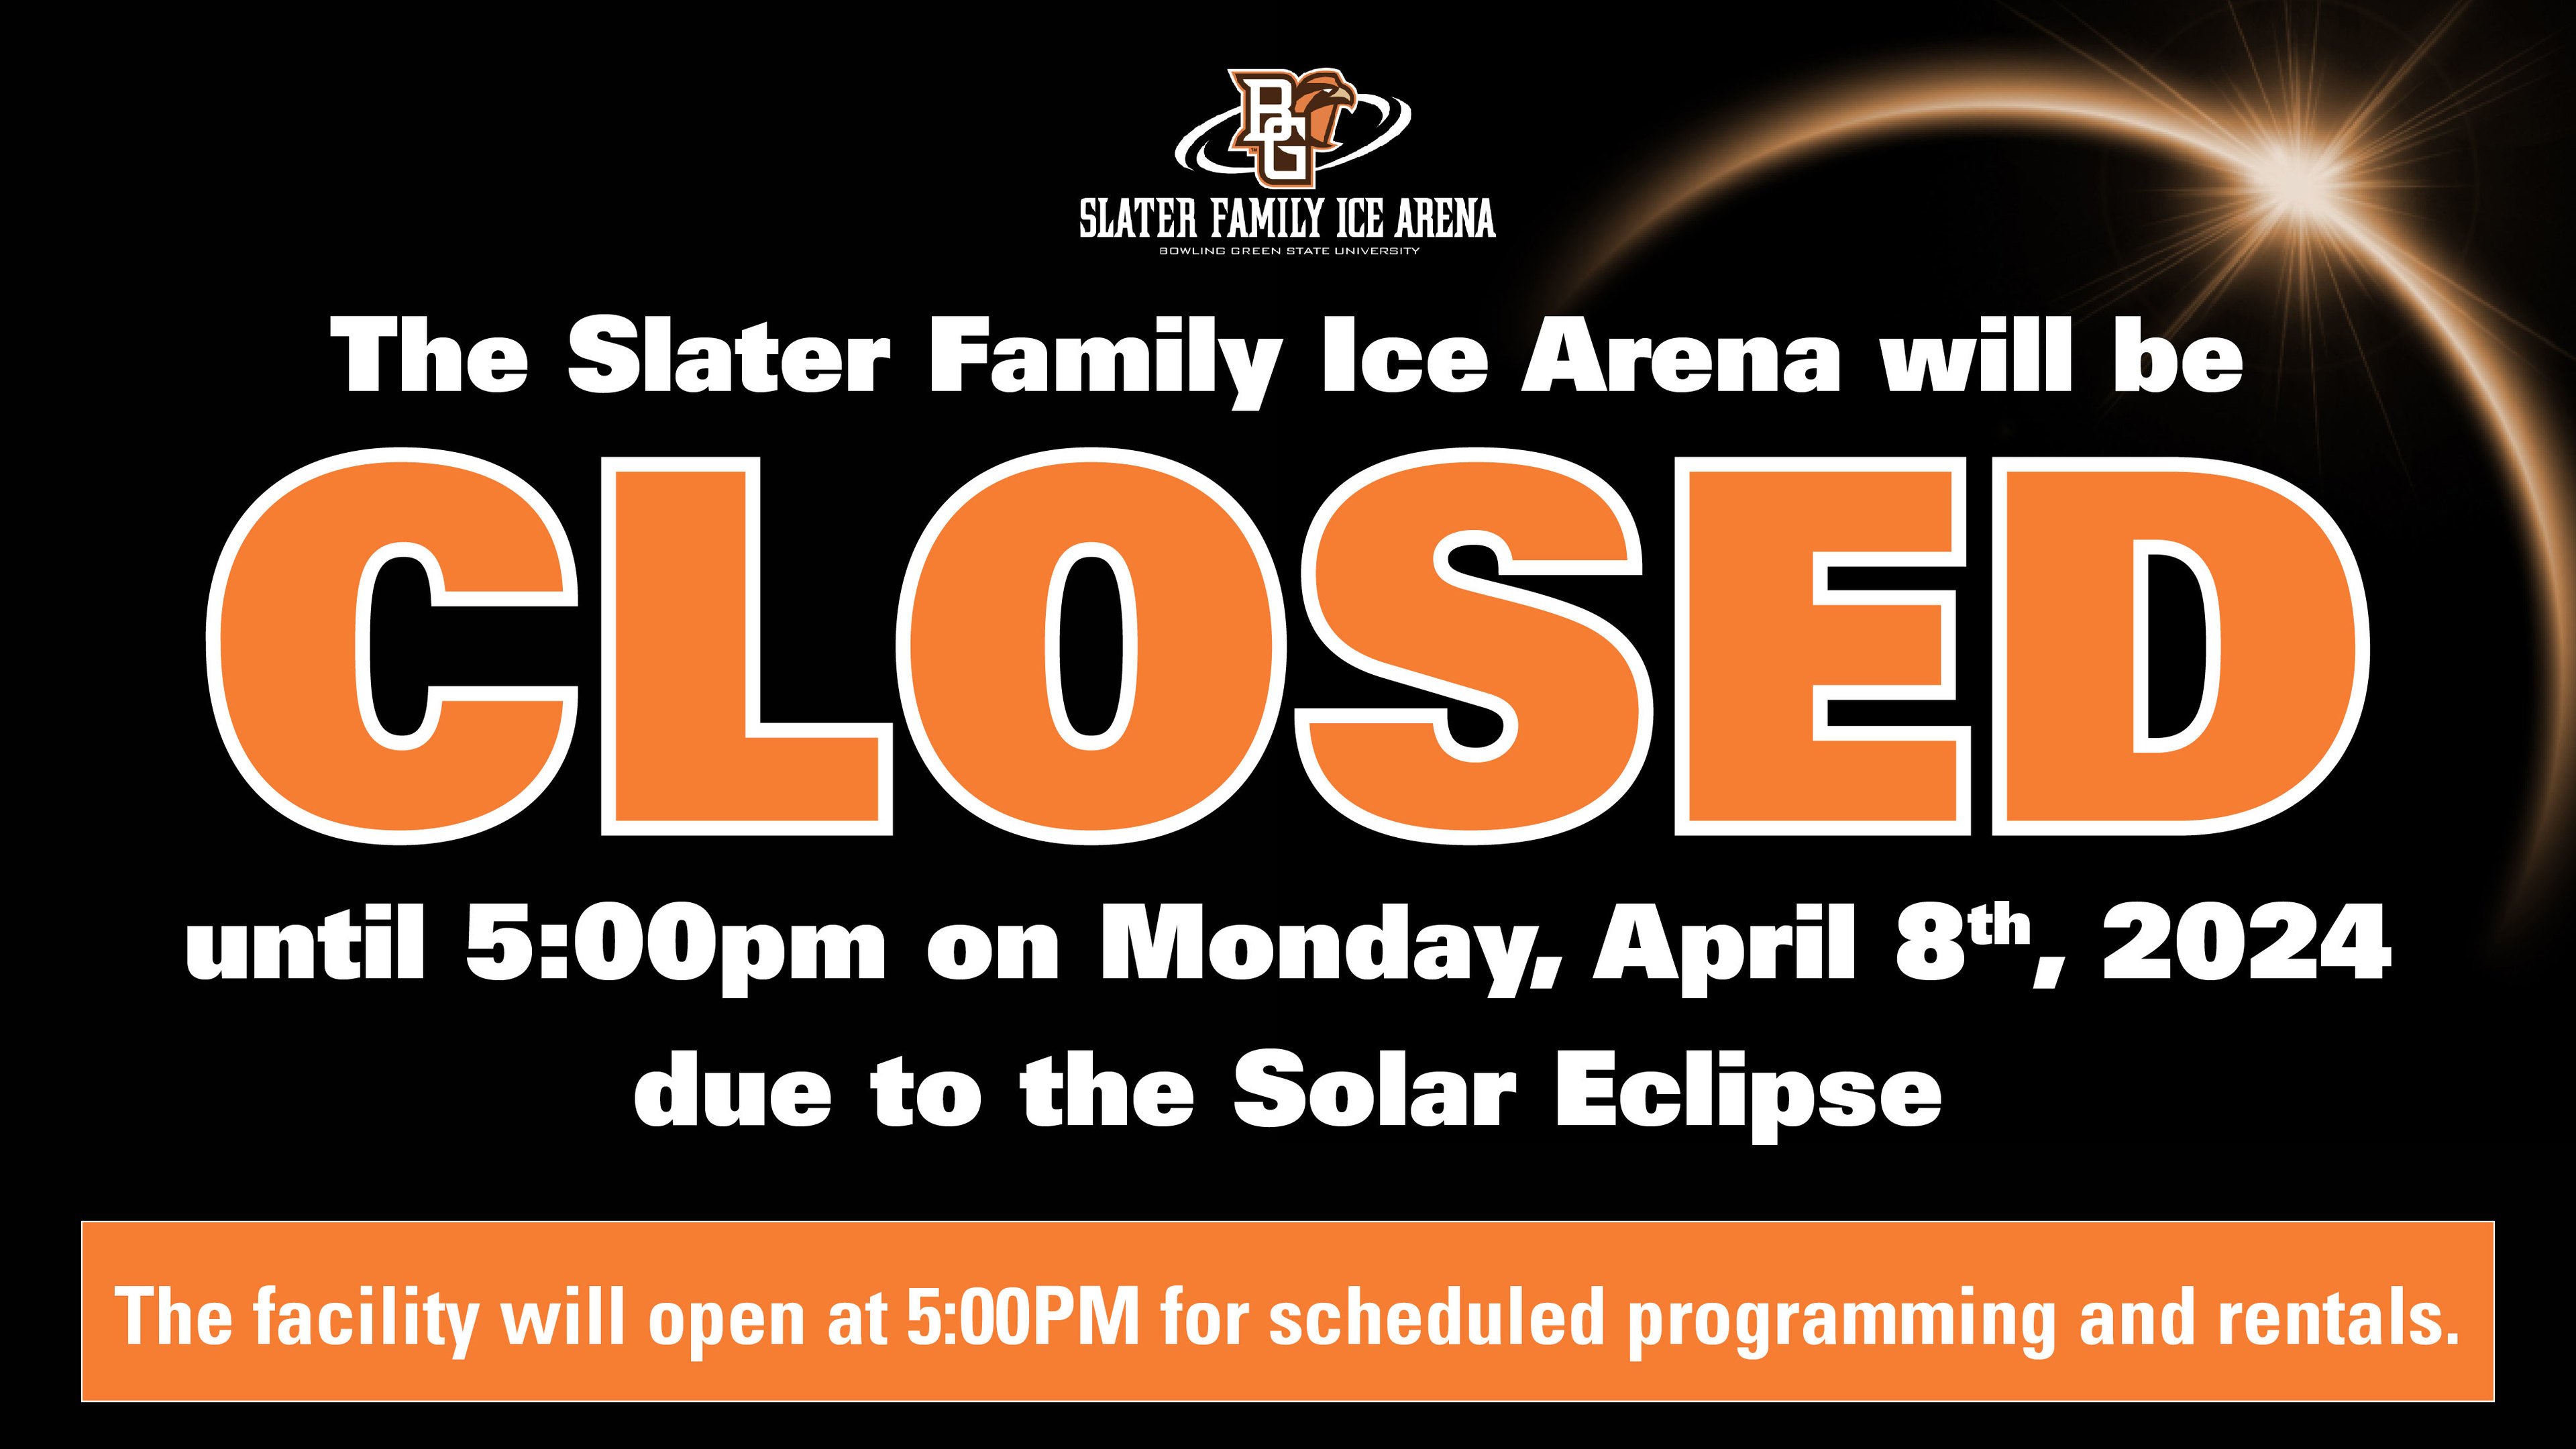 Ice Arena to open at 5PM on 4/8